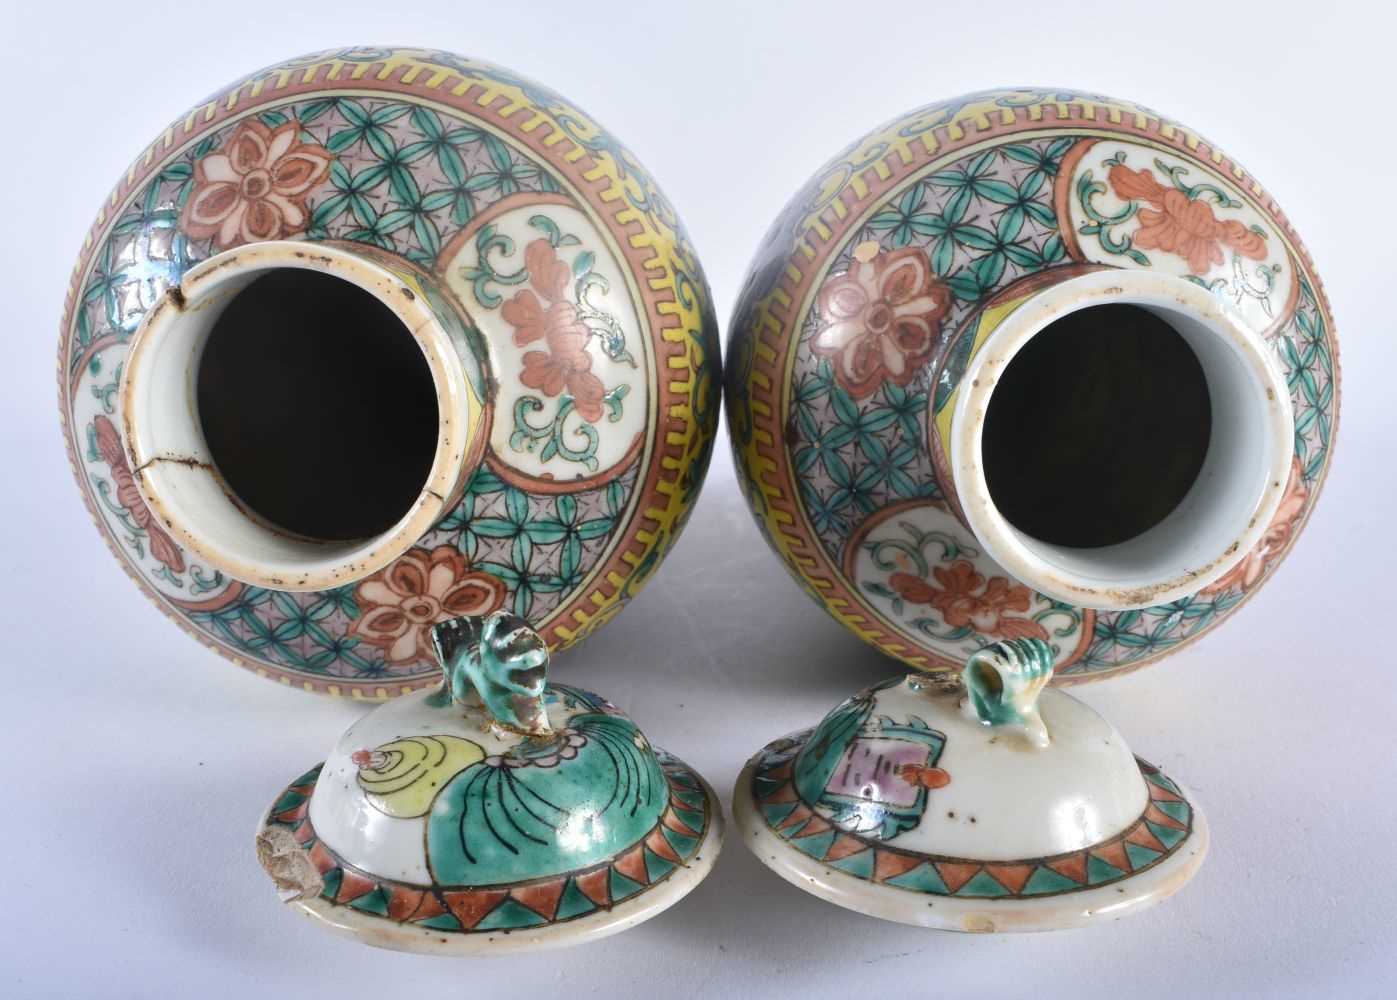 A PAIR OF 19TH CENTURY CHINESE FAMILLE JAUNE PORCELAIN VASES AND COVERS Qing, painted with figures - Image 4 of 5